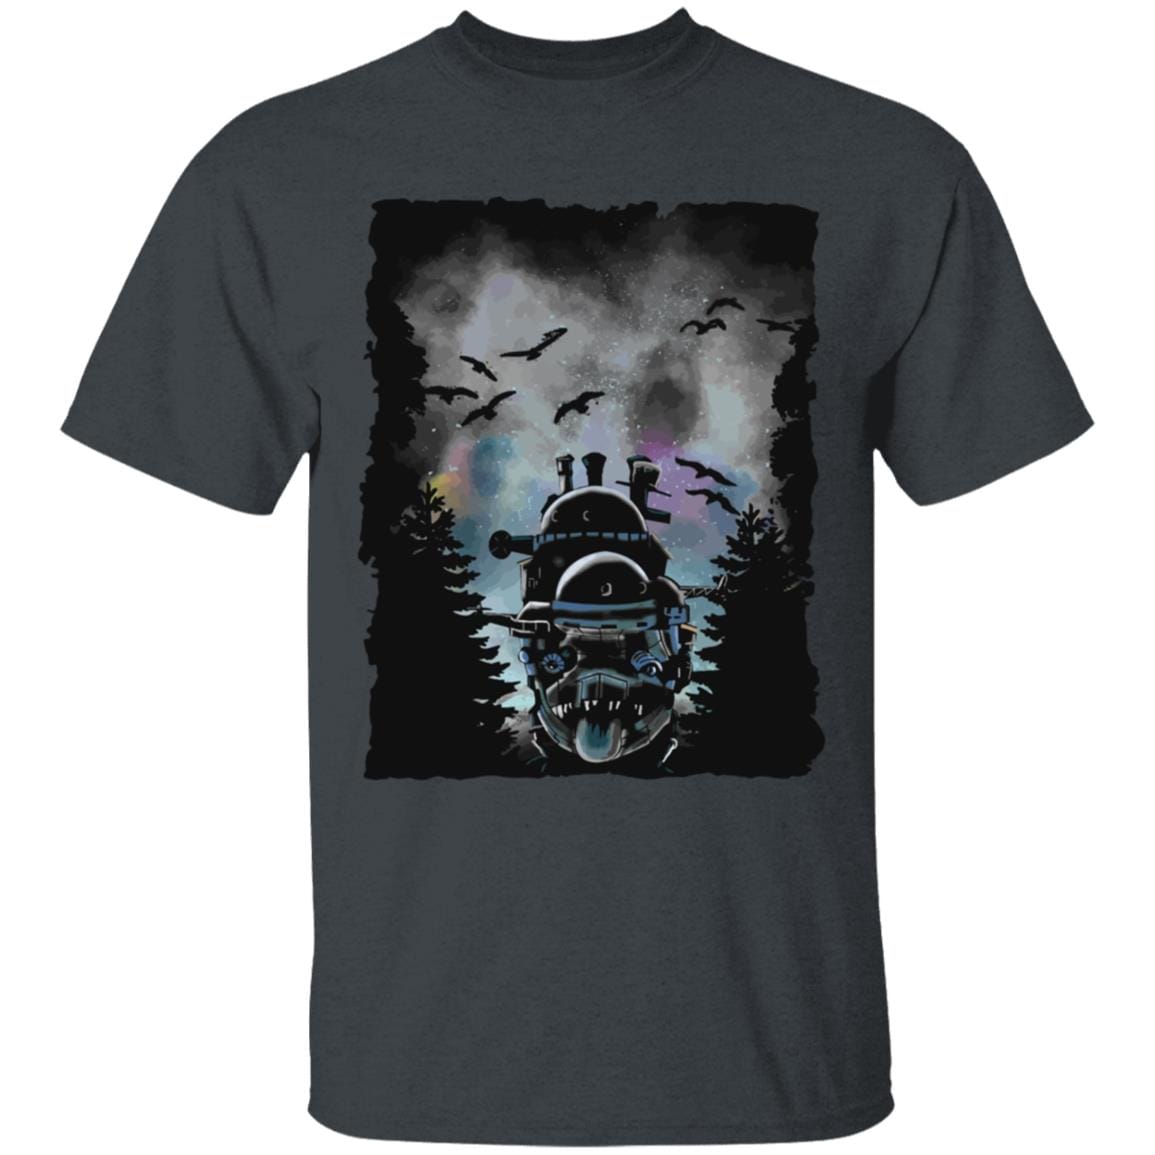 Howl’s Moving Castle At Night T Shirt for Kid Ghibli Store ghibli.store